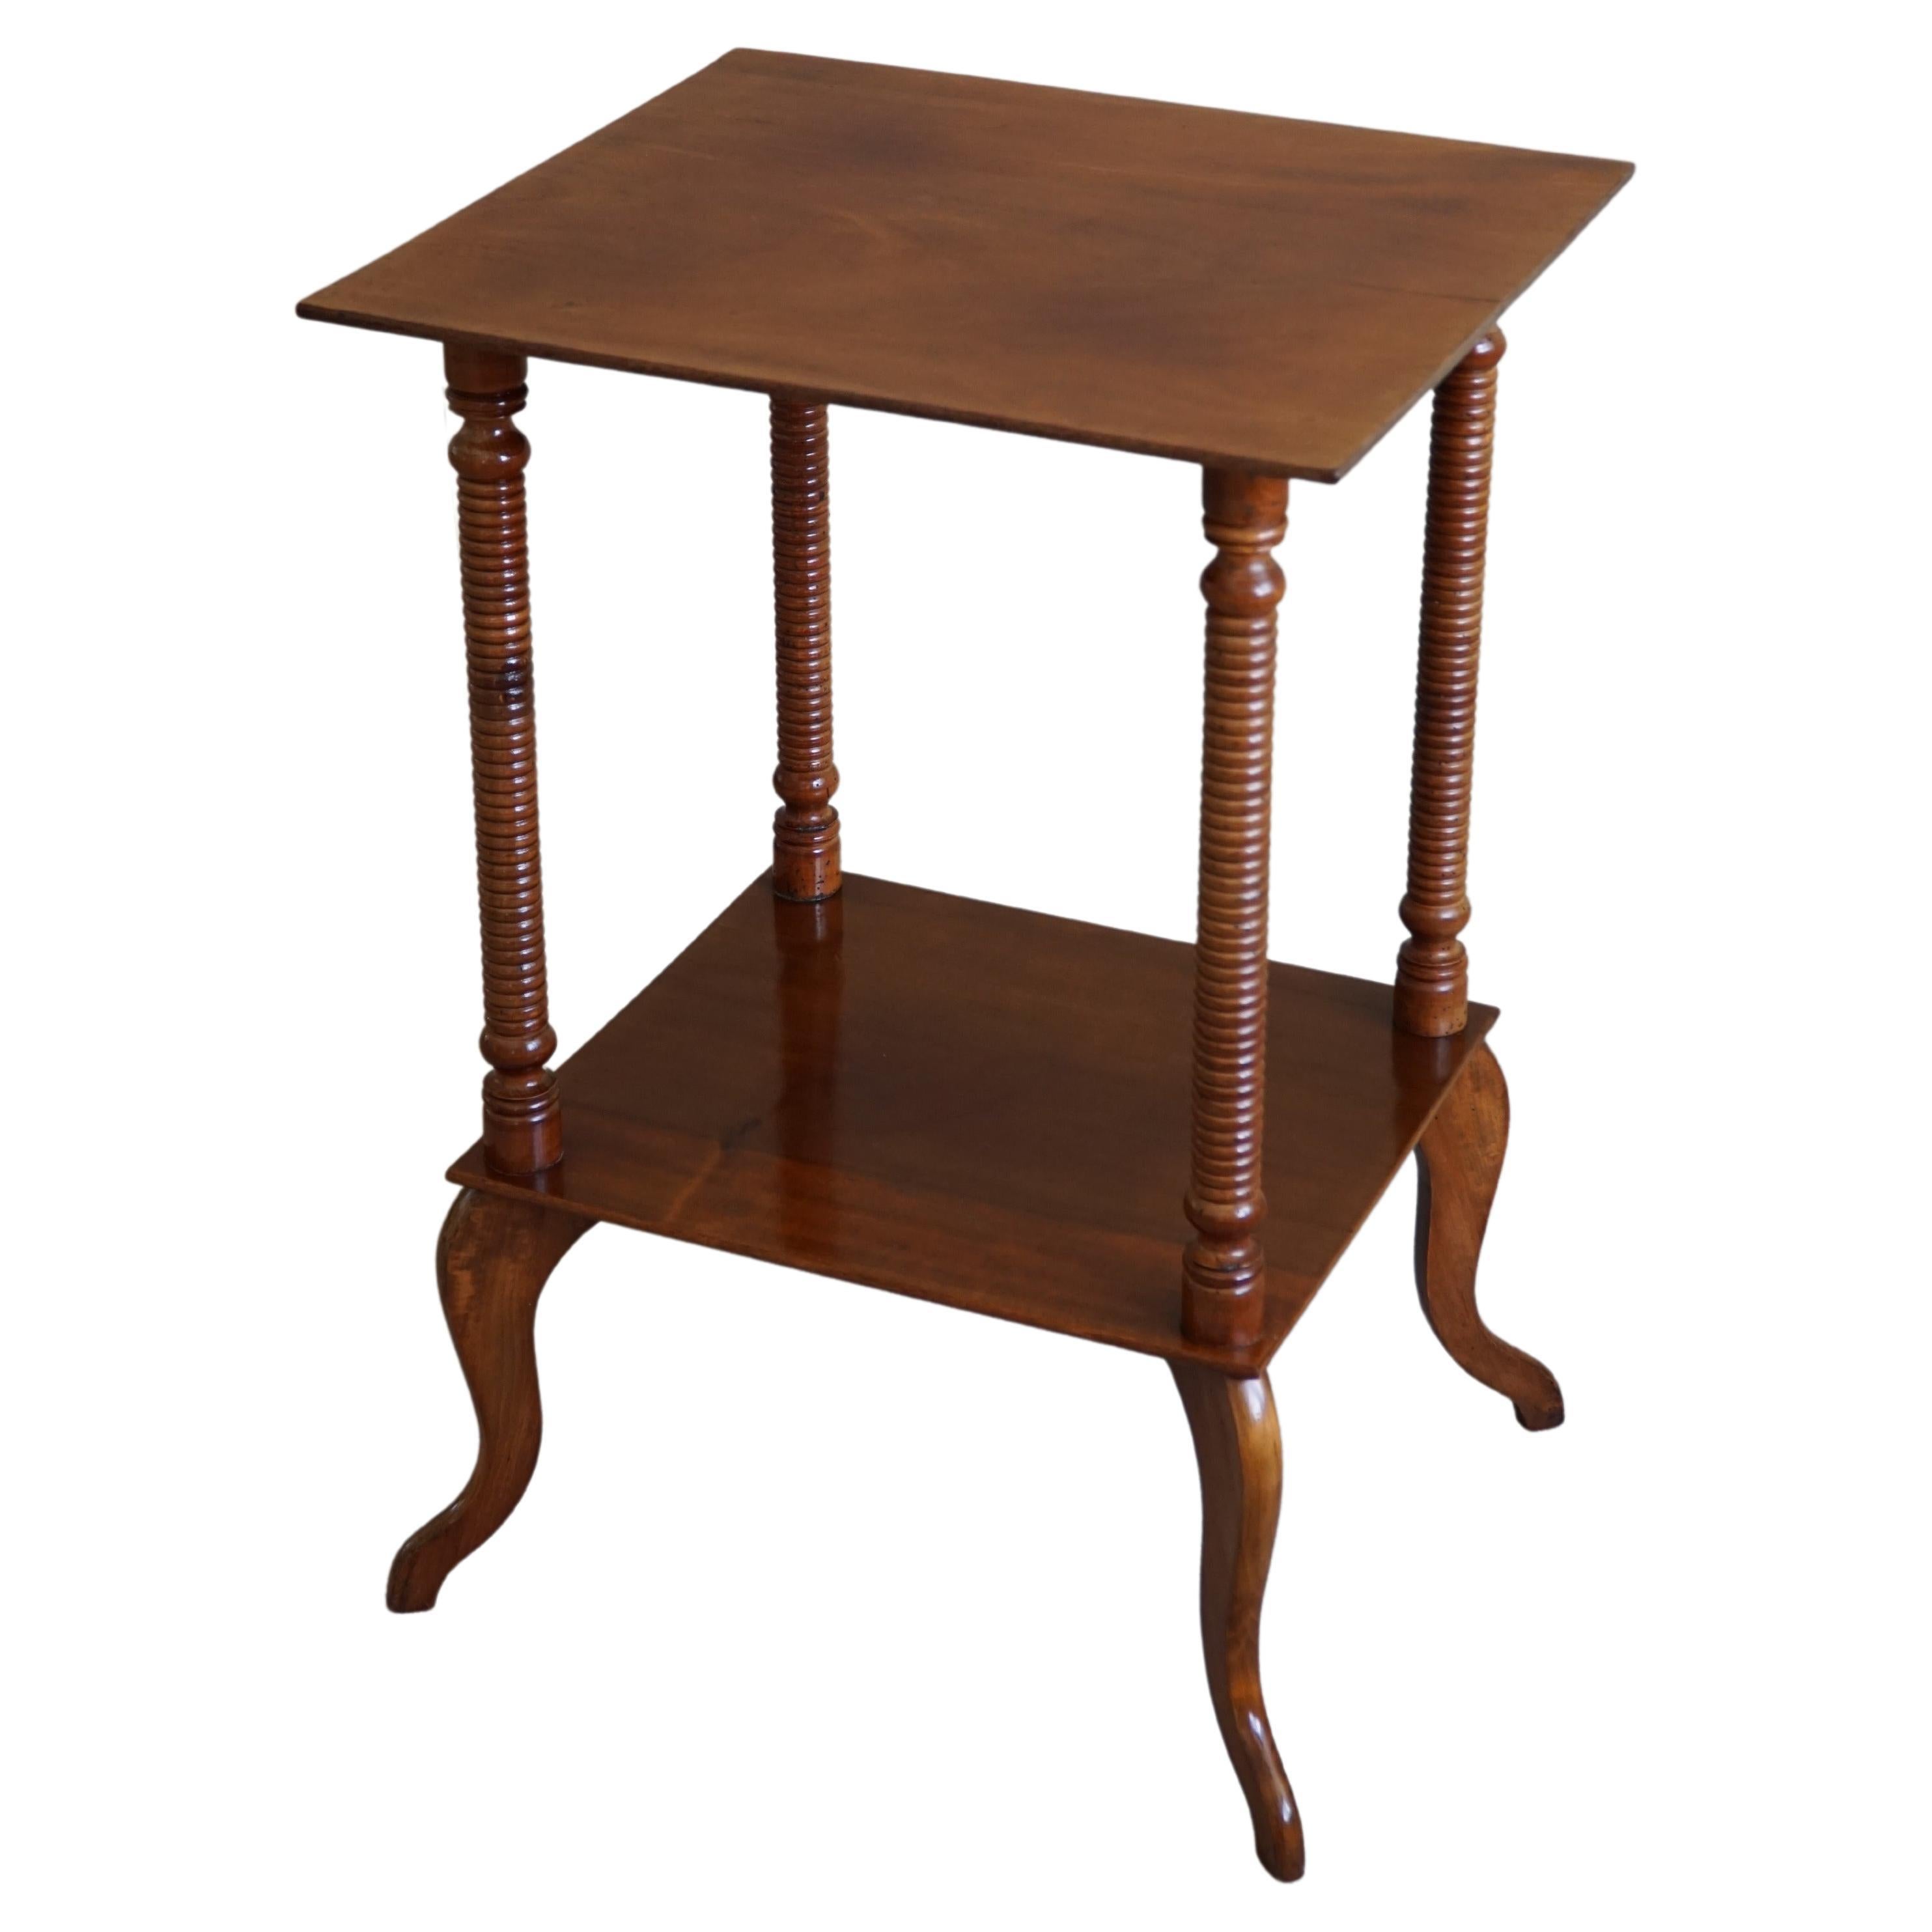 Danish Side Table / Pedestal with Finely Carved Legs, Early 20th Century For Sale